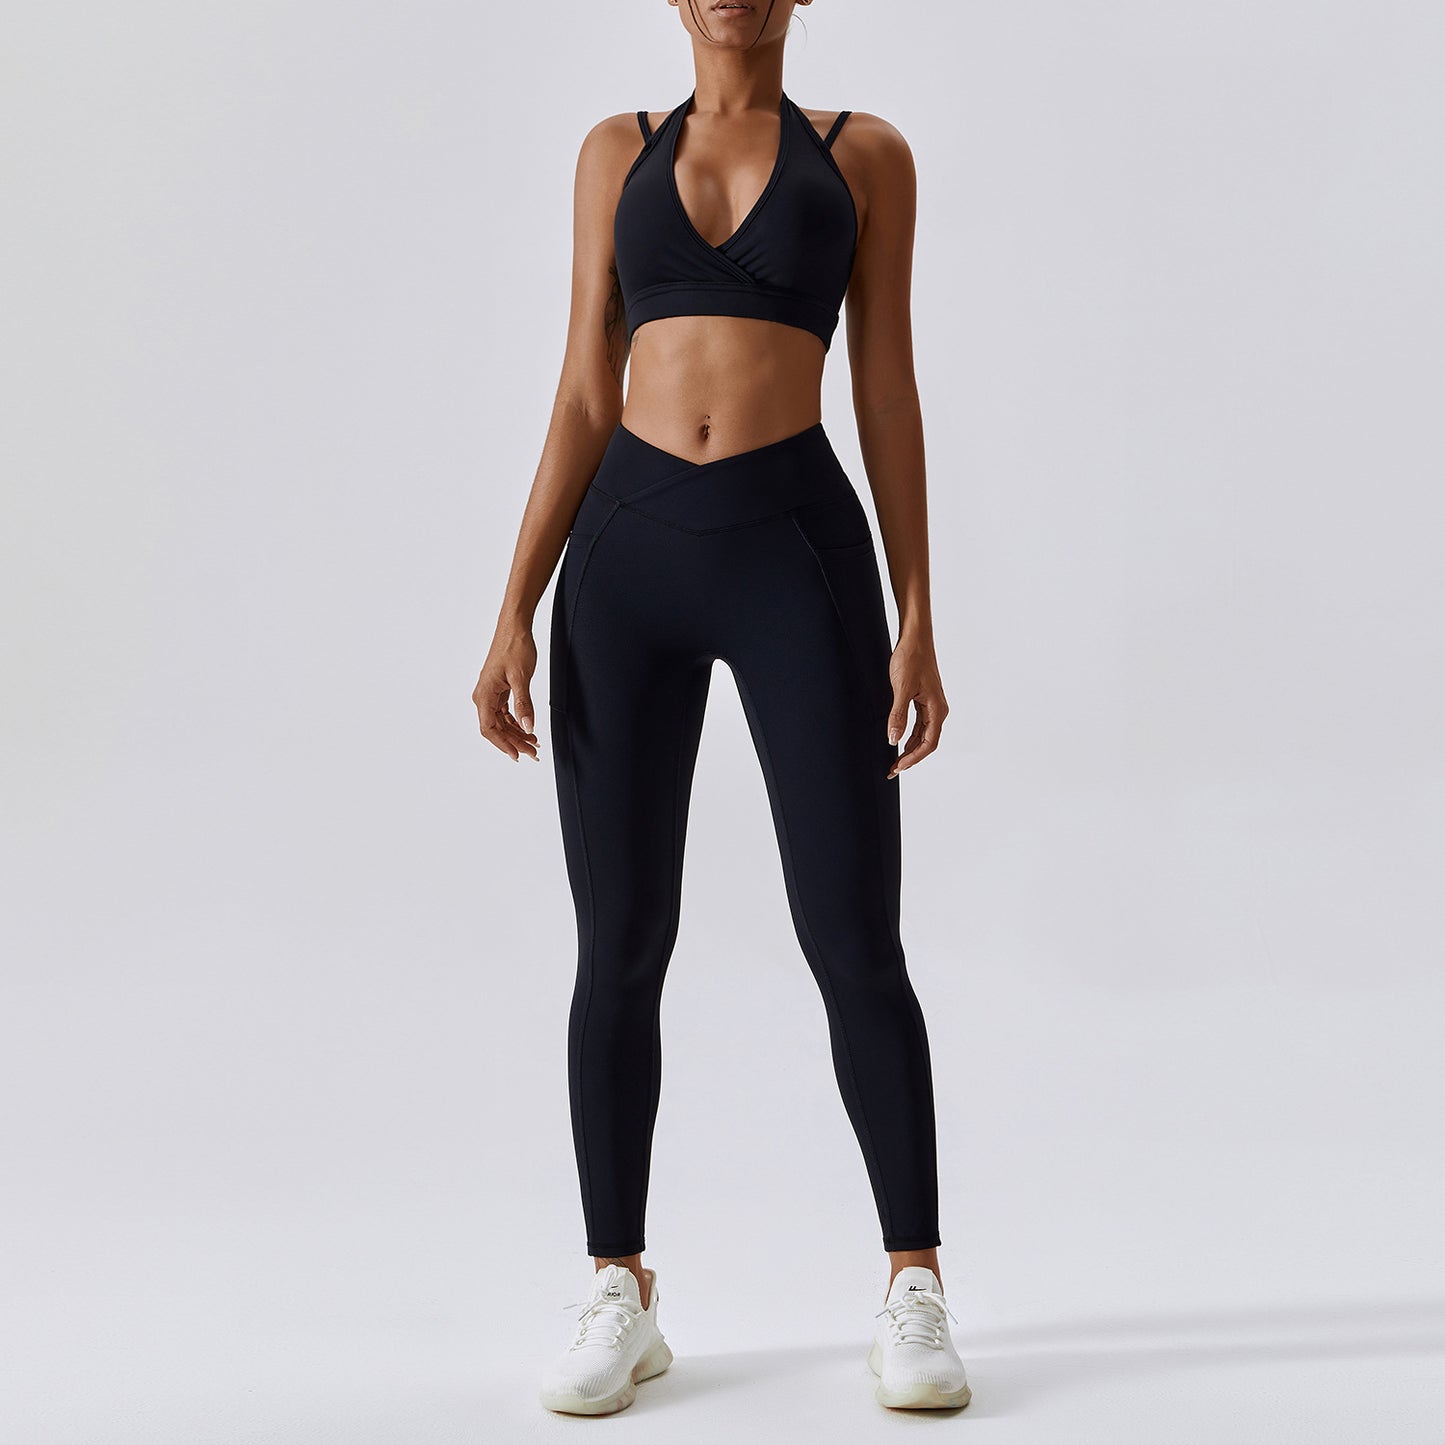 Criss Cross Nude Feel Yoga Clothes Women Hip Lift Quick Drying Breathable Skinny Running Suit Sports Back Shaping Workout Clothes